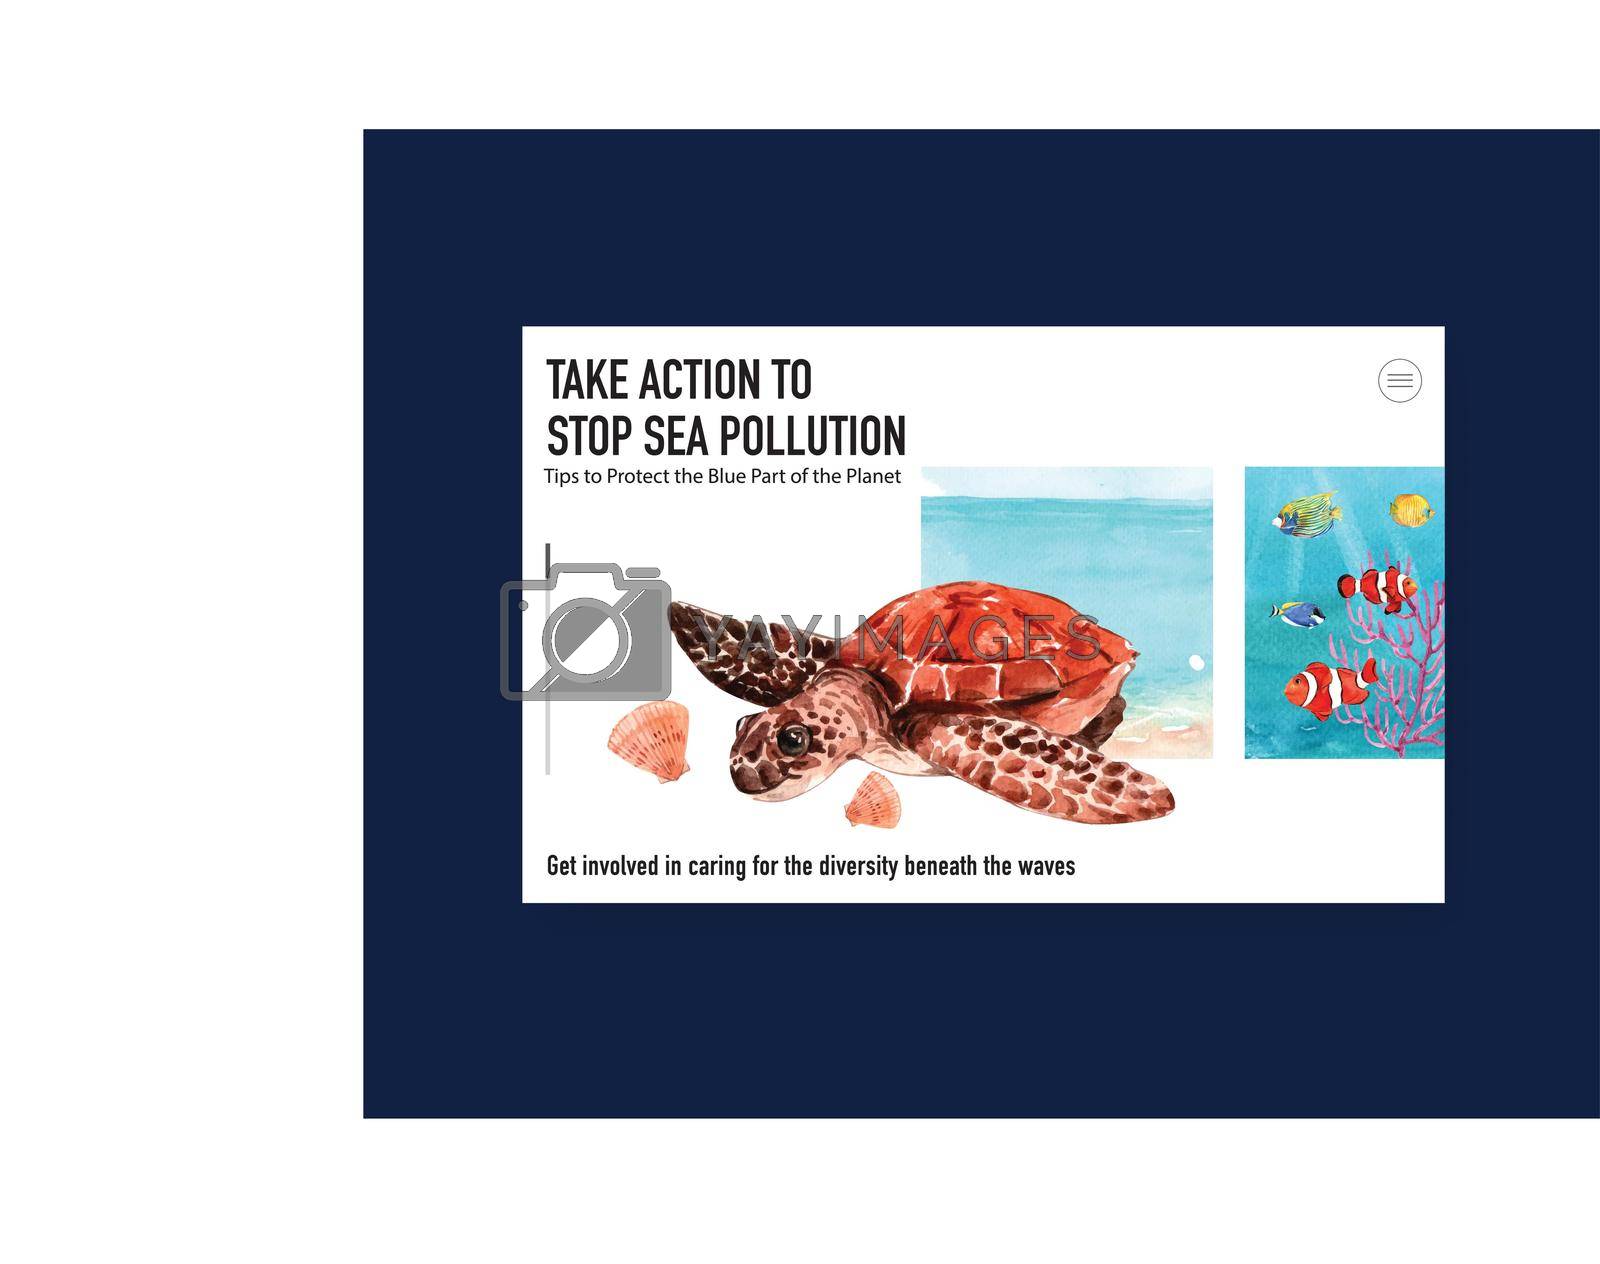 Website template design for World Oceans Day concept with marine animals watercolor vector
